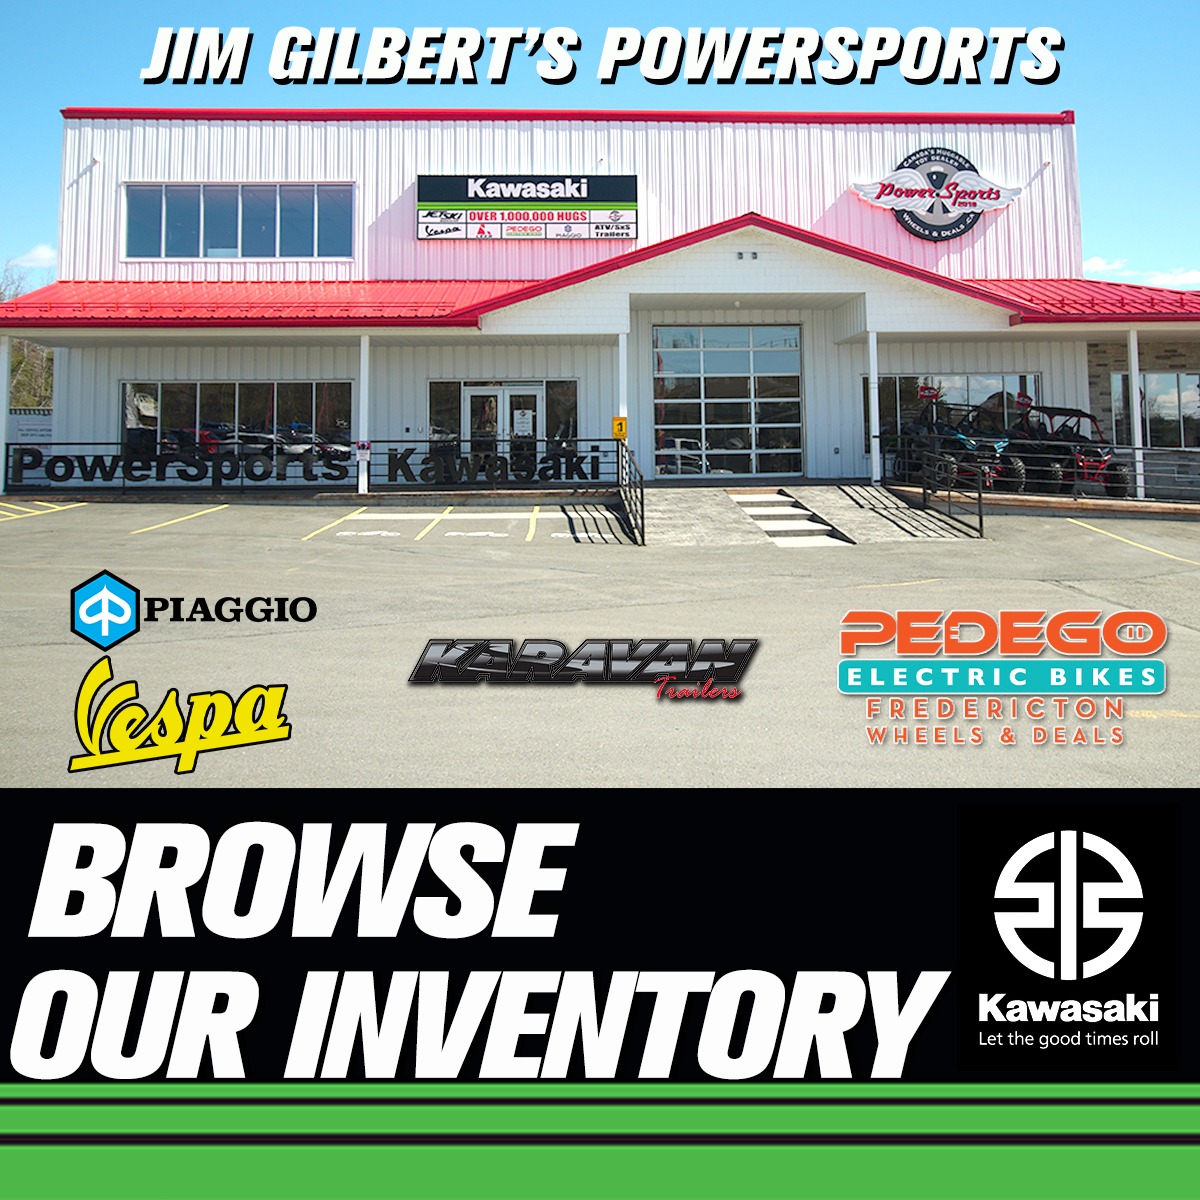 Powersports Wheels and Deals